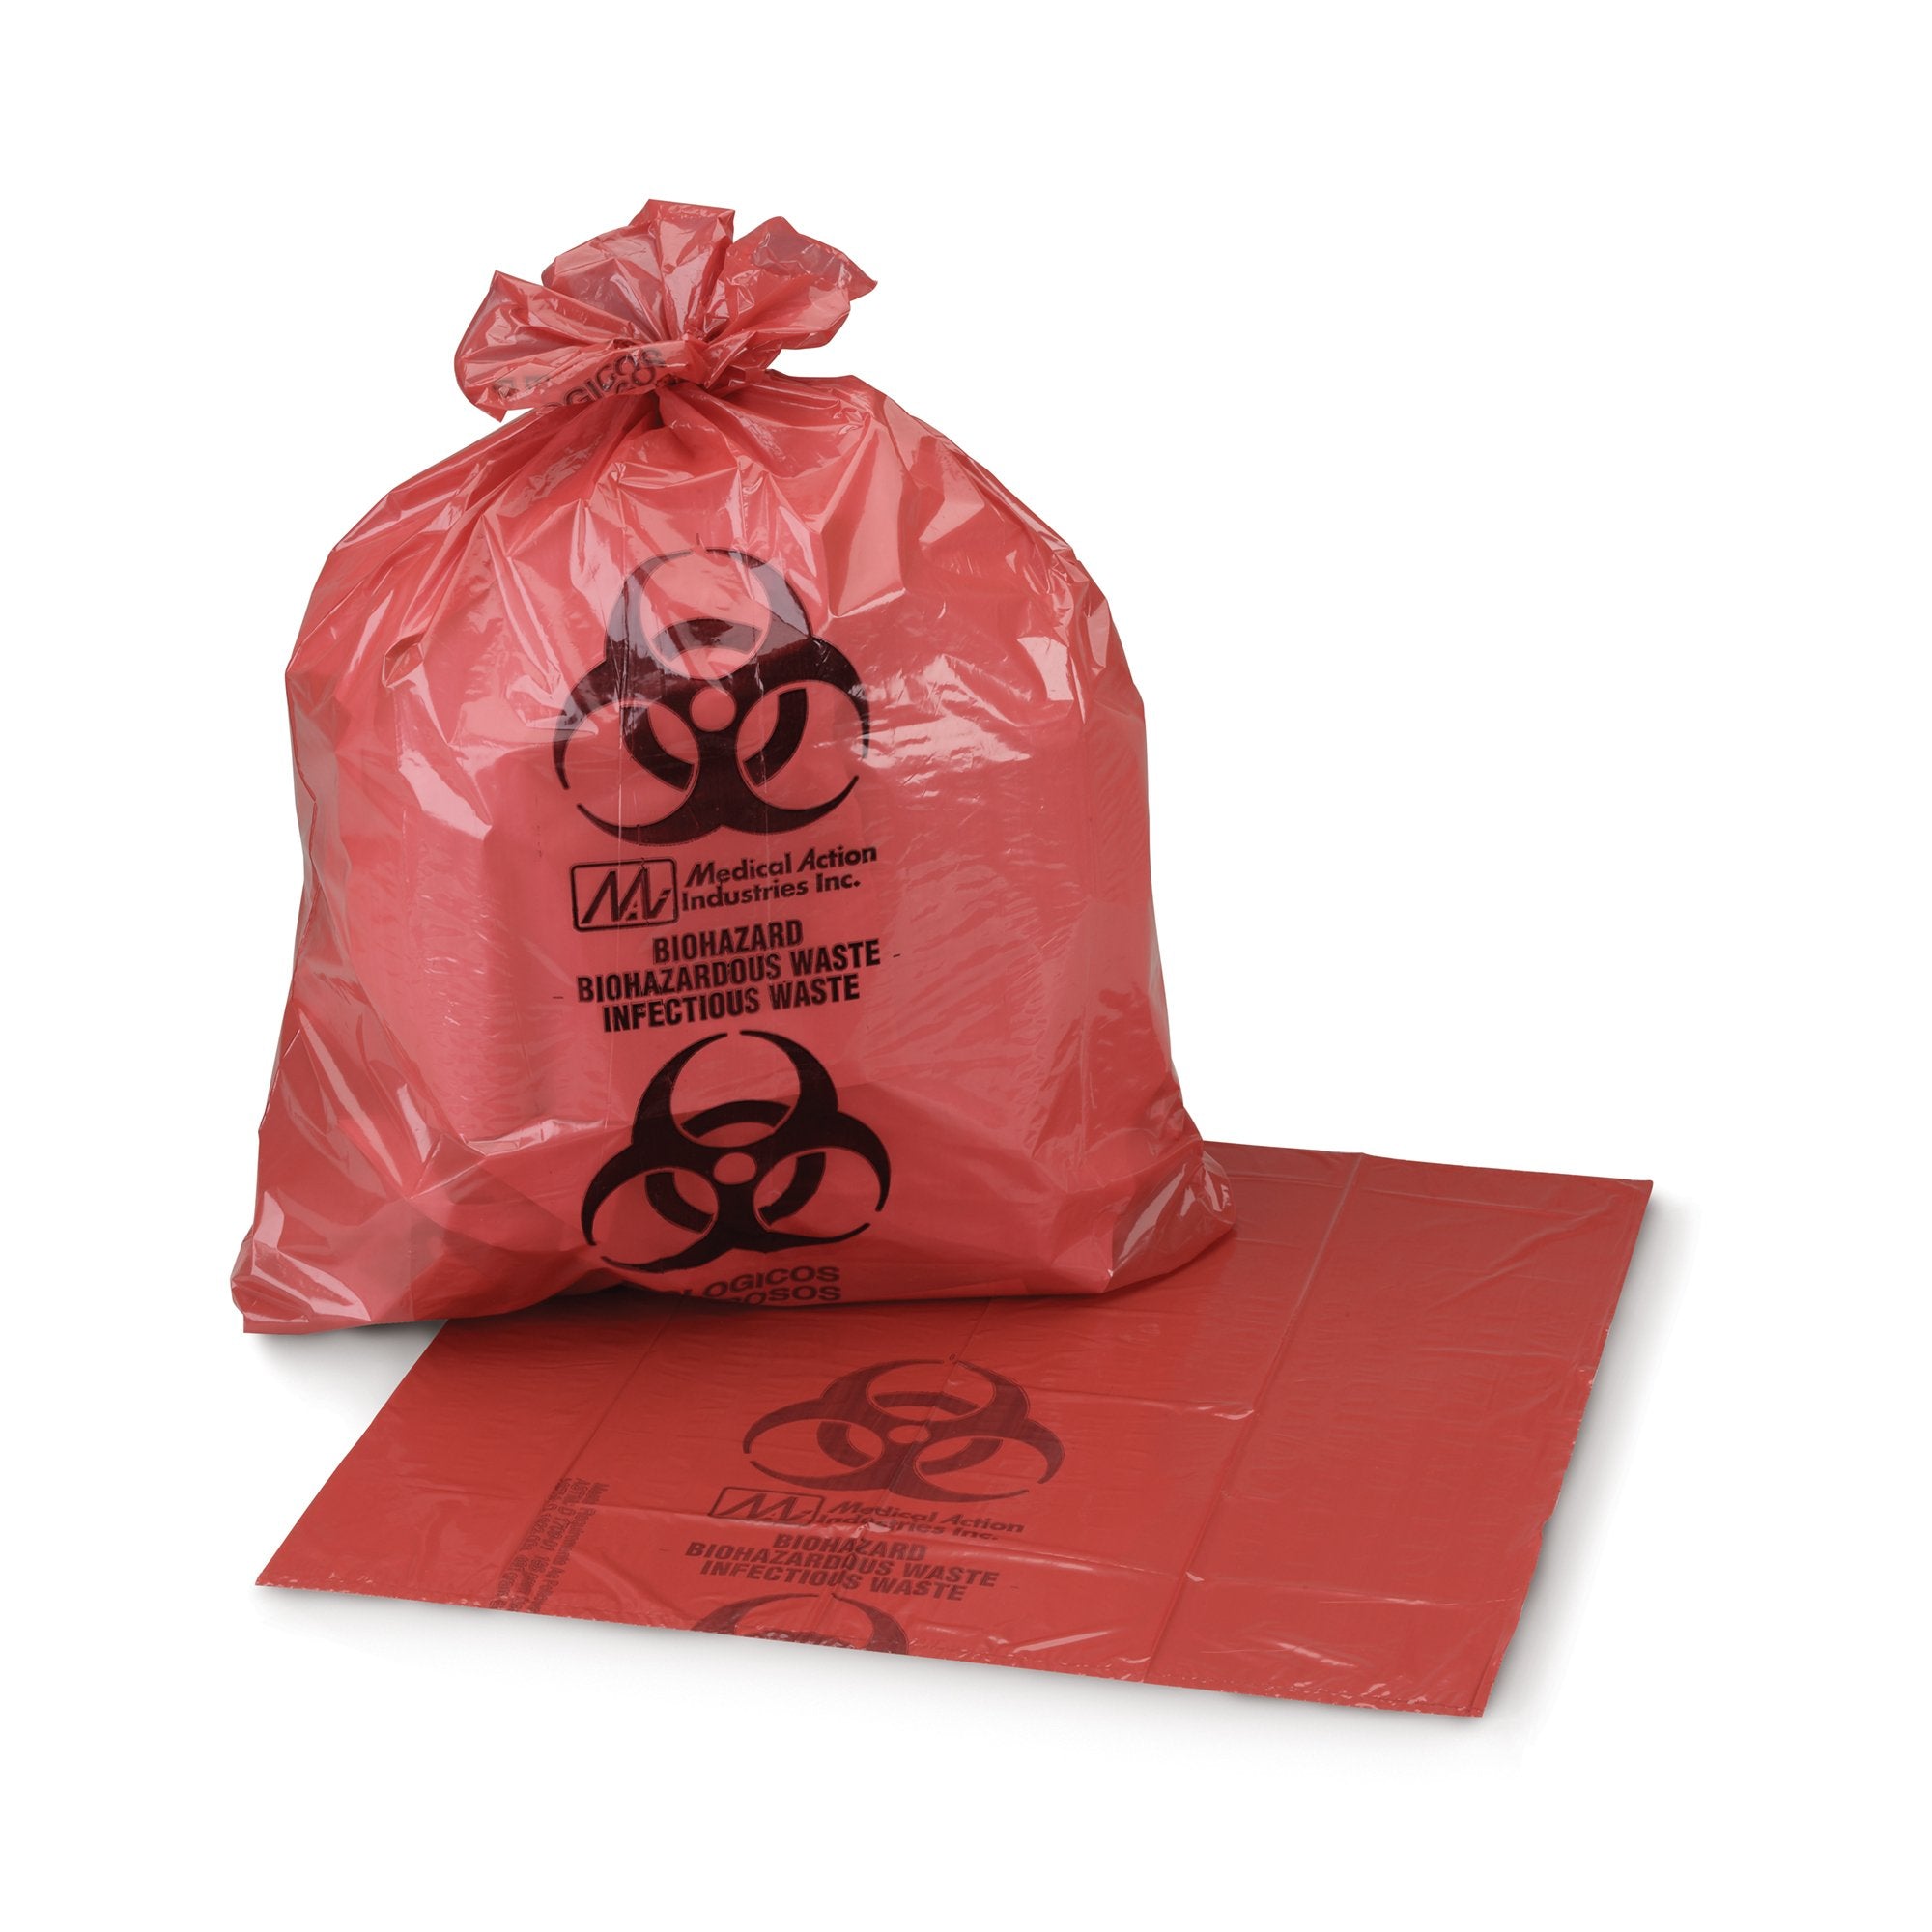 Infectious Waste Bag McKesson 45 to 55 gal. Red Bag 40 X 55 Inch